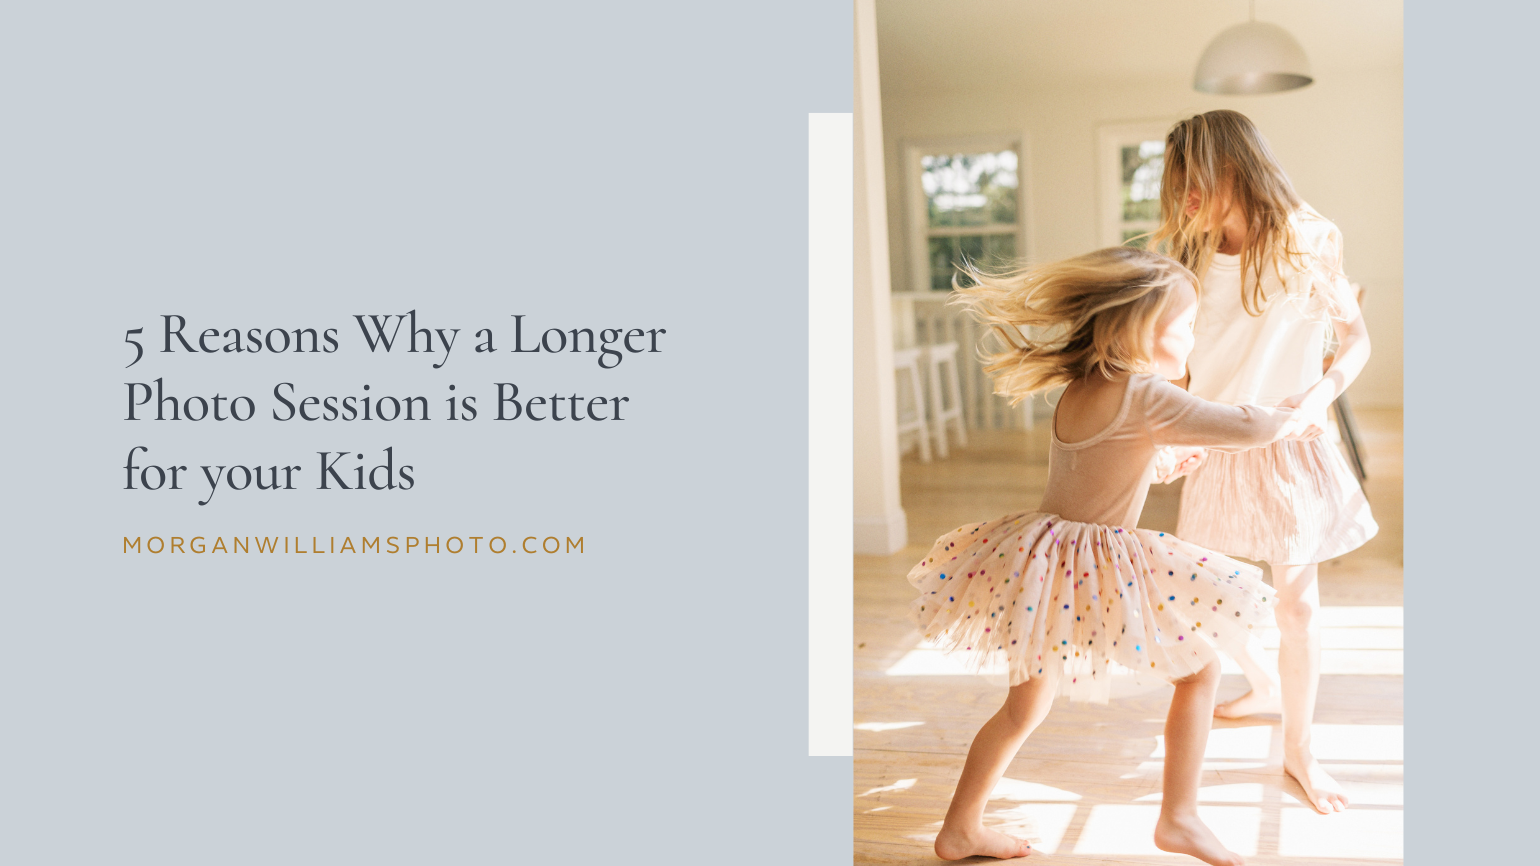 Longer photo session is better for your kids